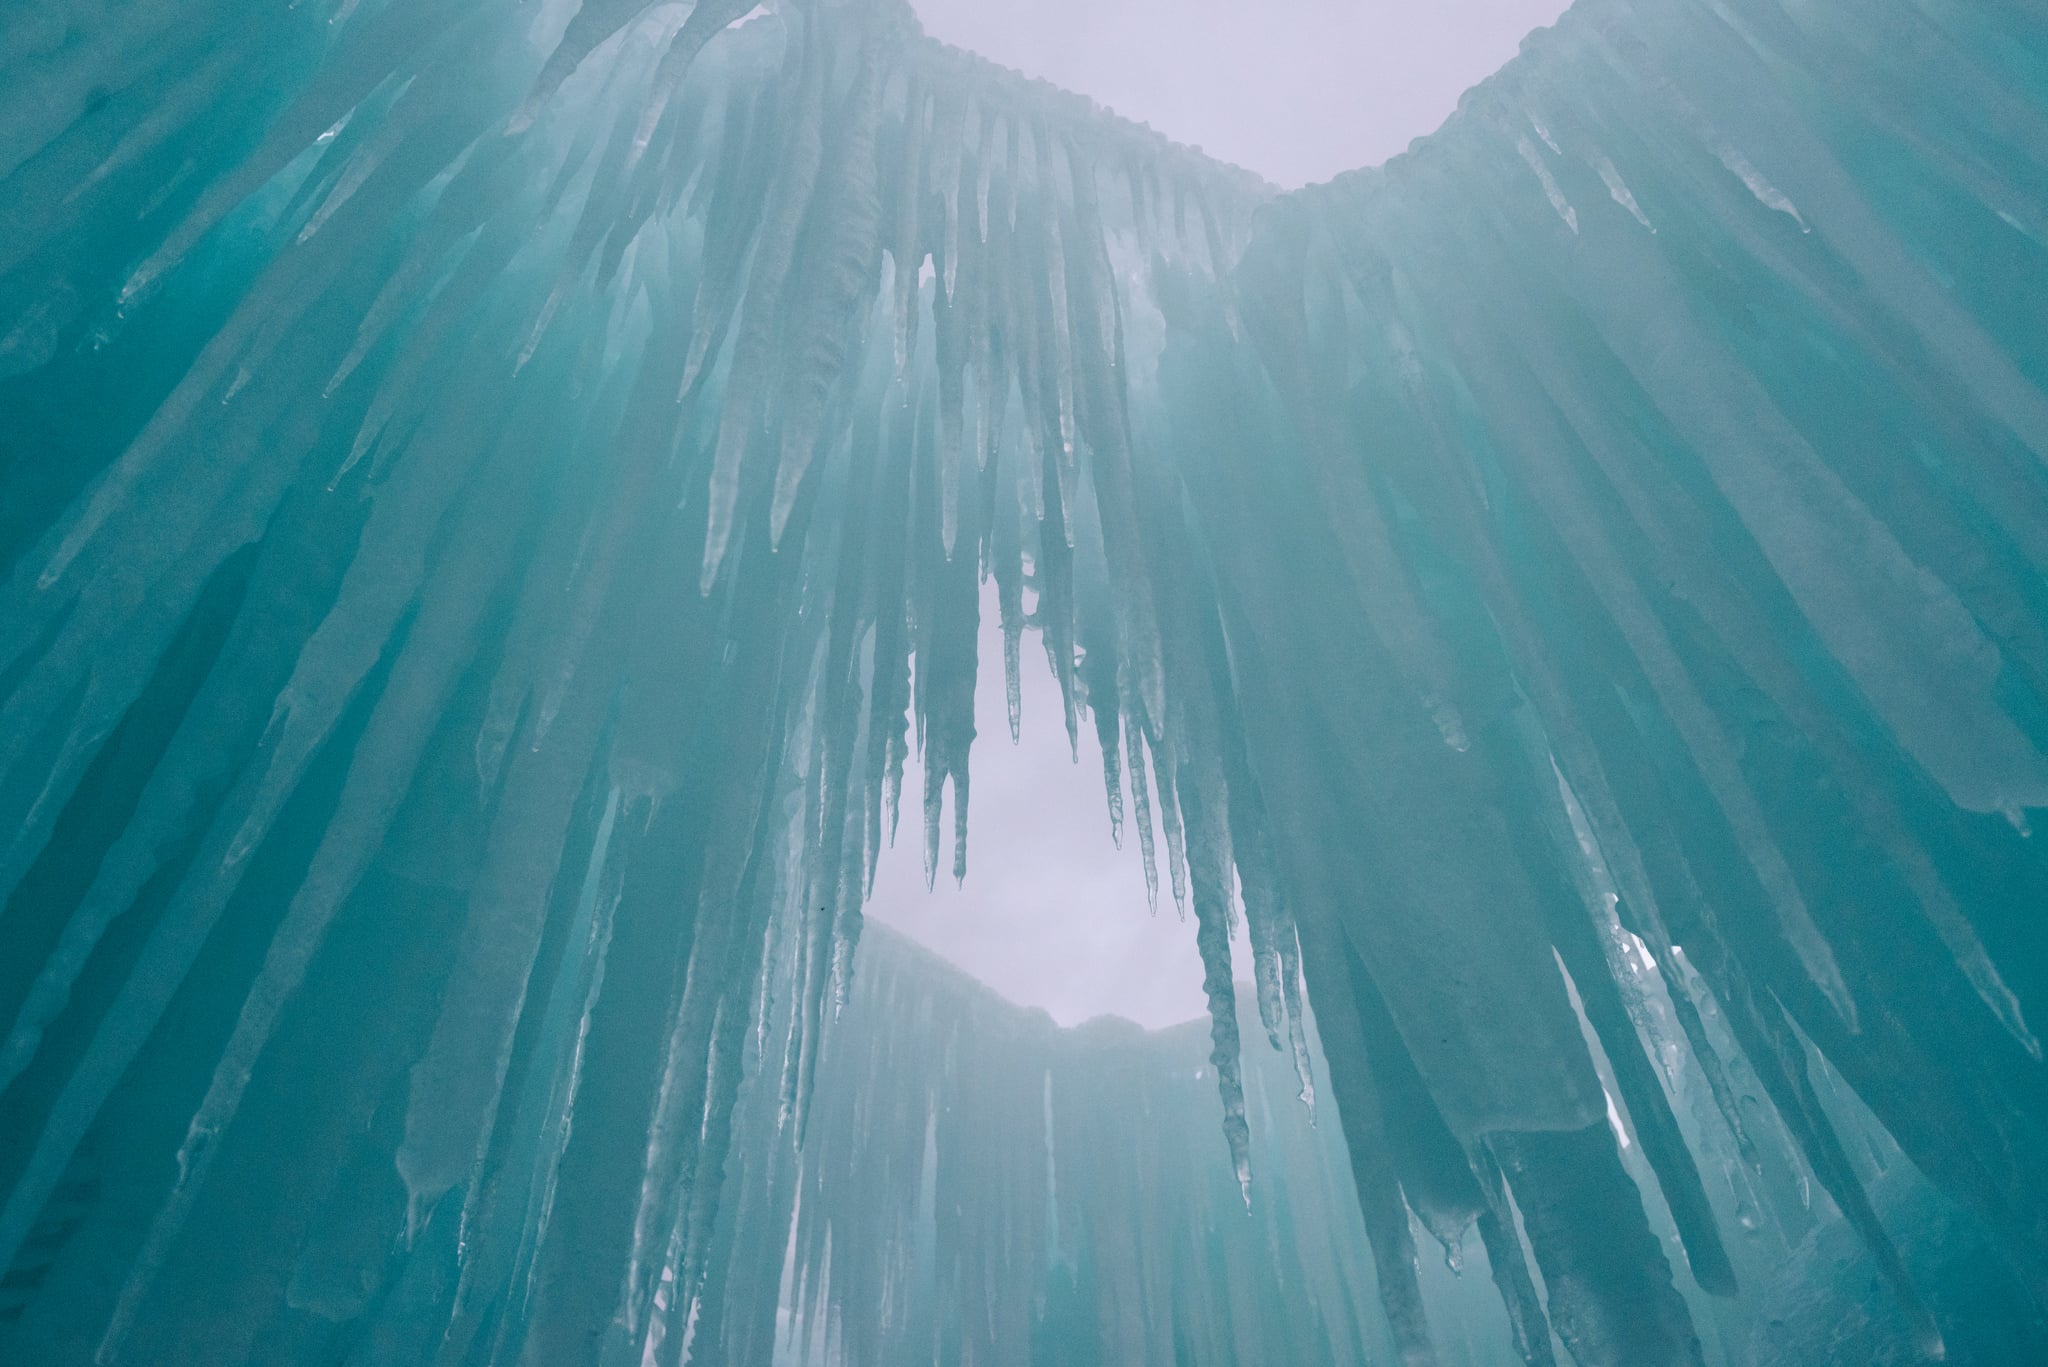 Traveling in USA: Ice castles in new Hampshire